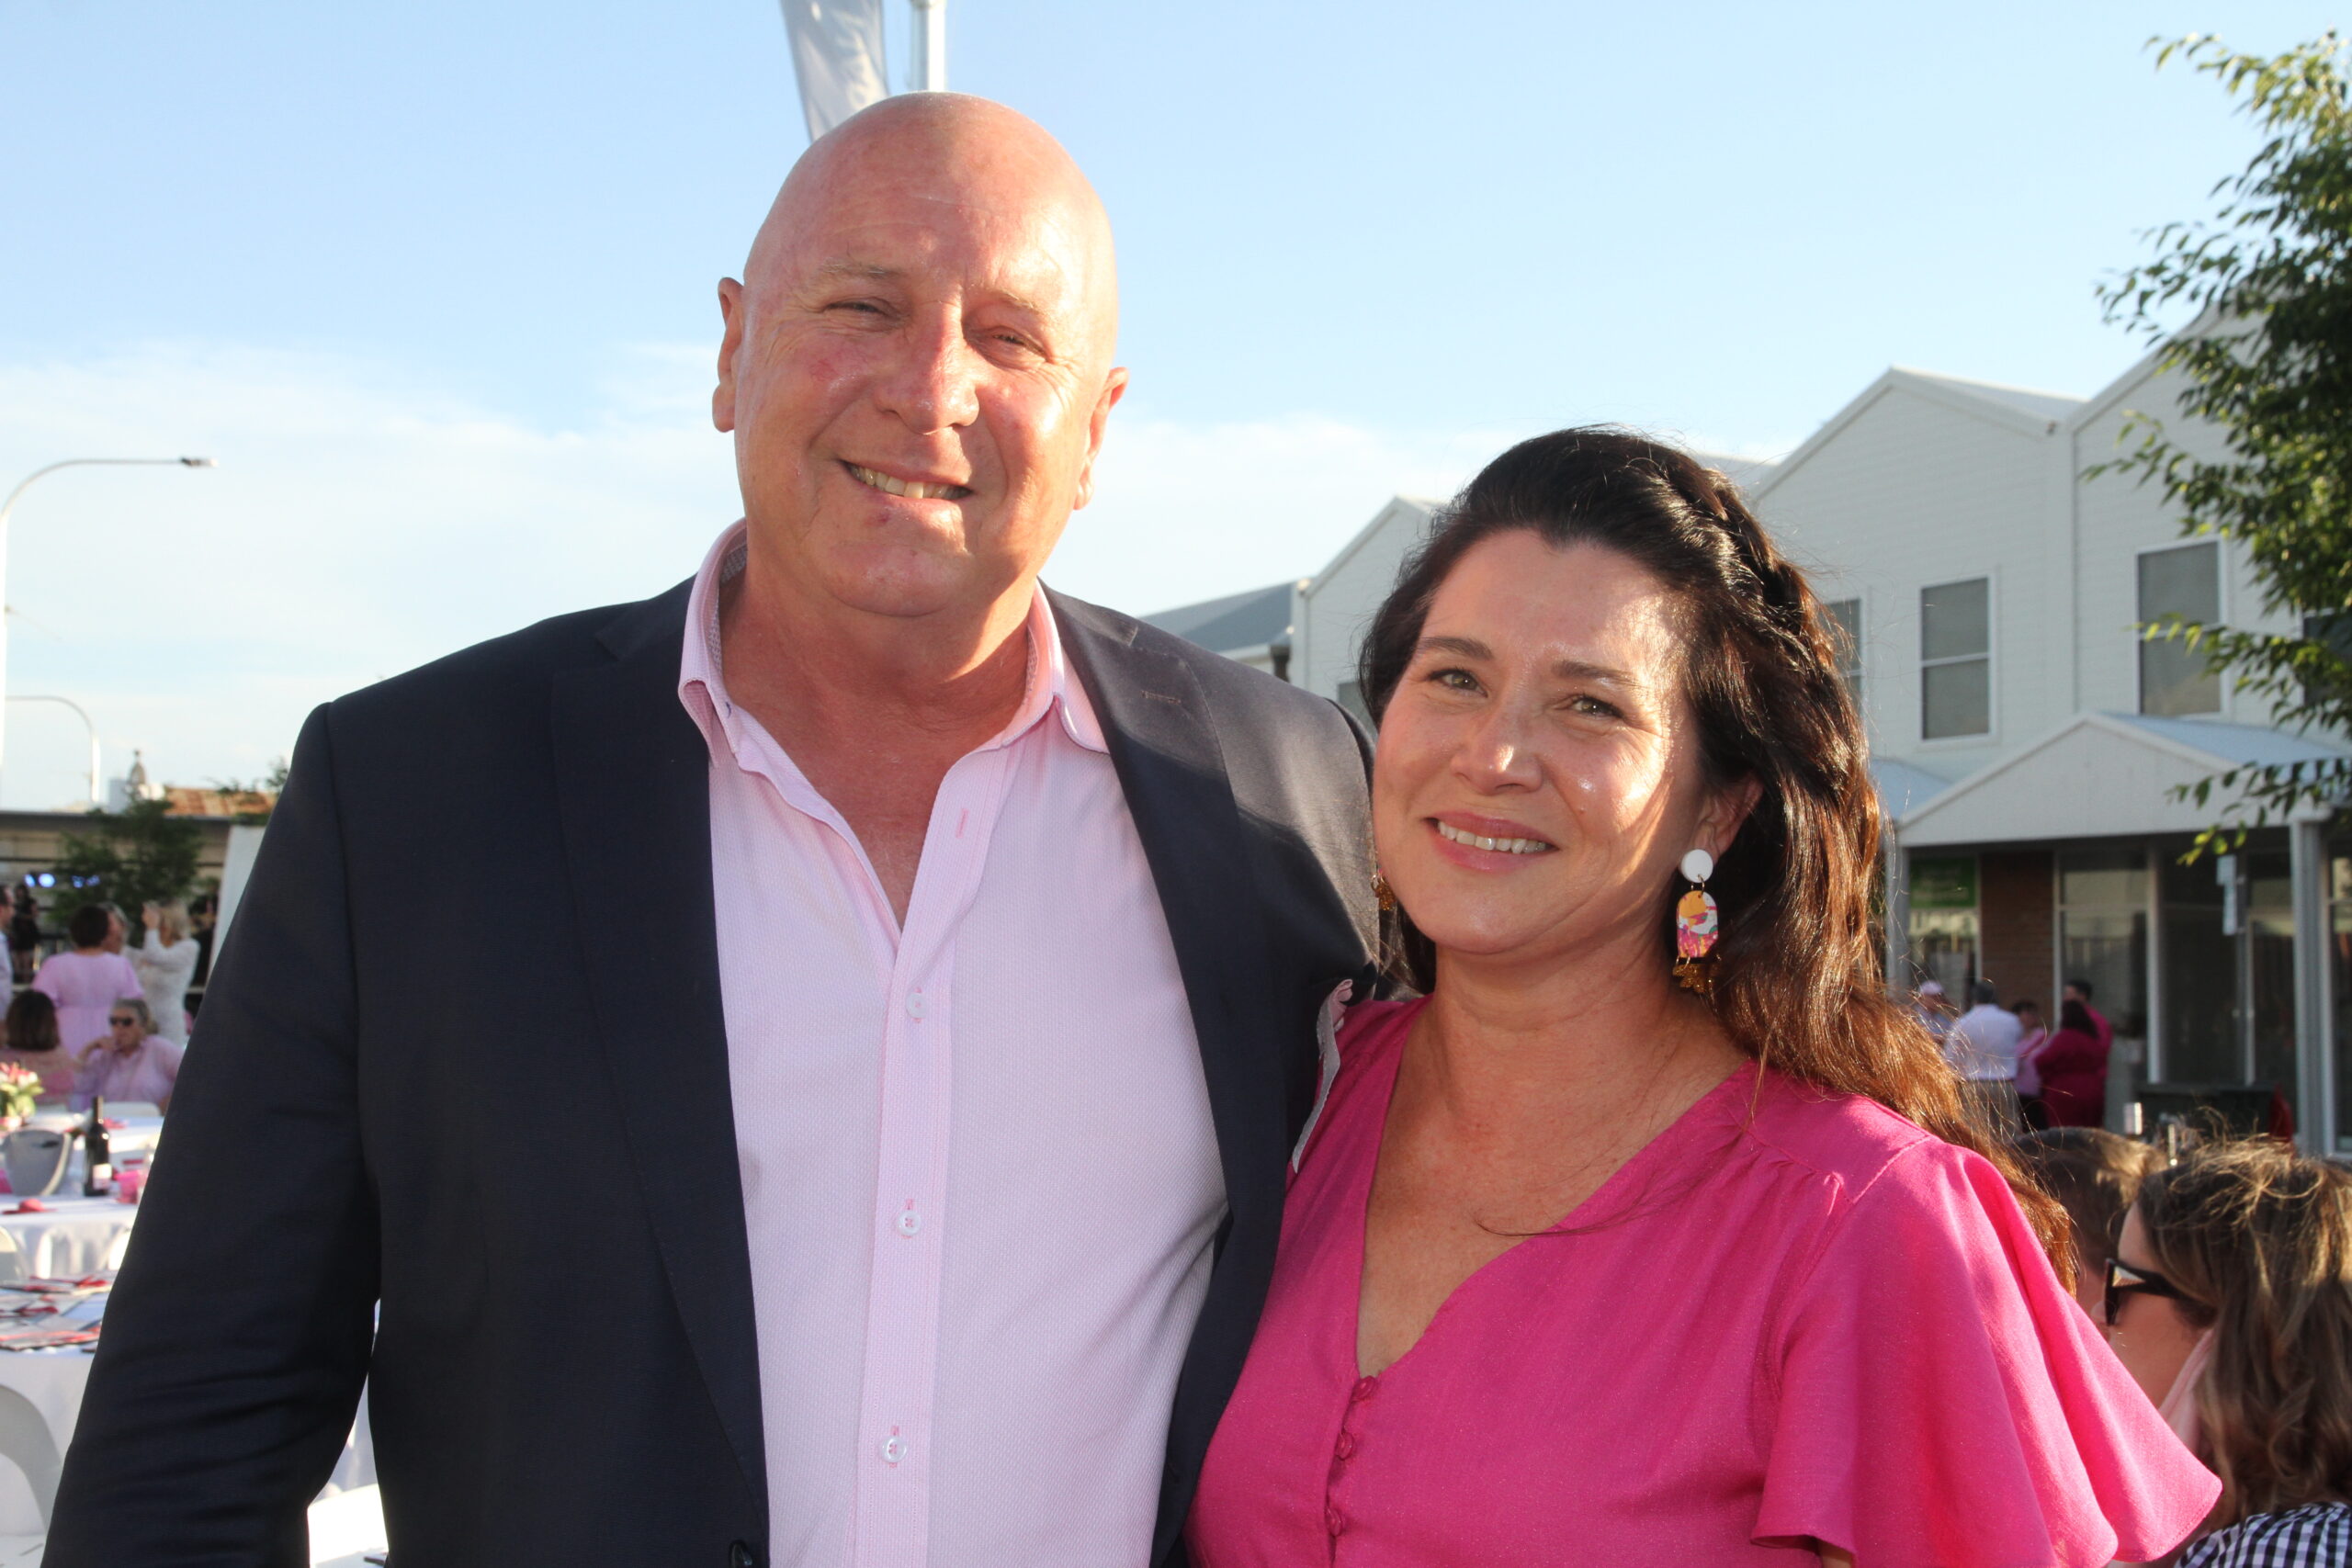 Mayor Ron Campbell and his wife Brighid enjoyed the pink-themed celebration.